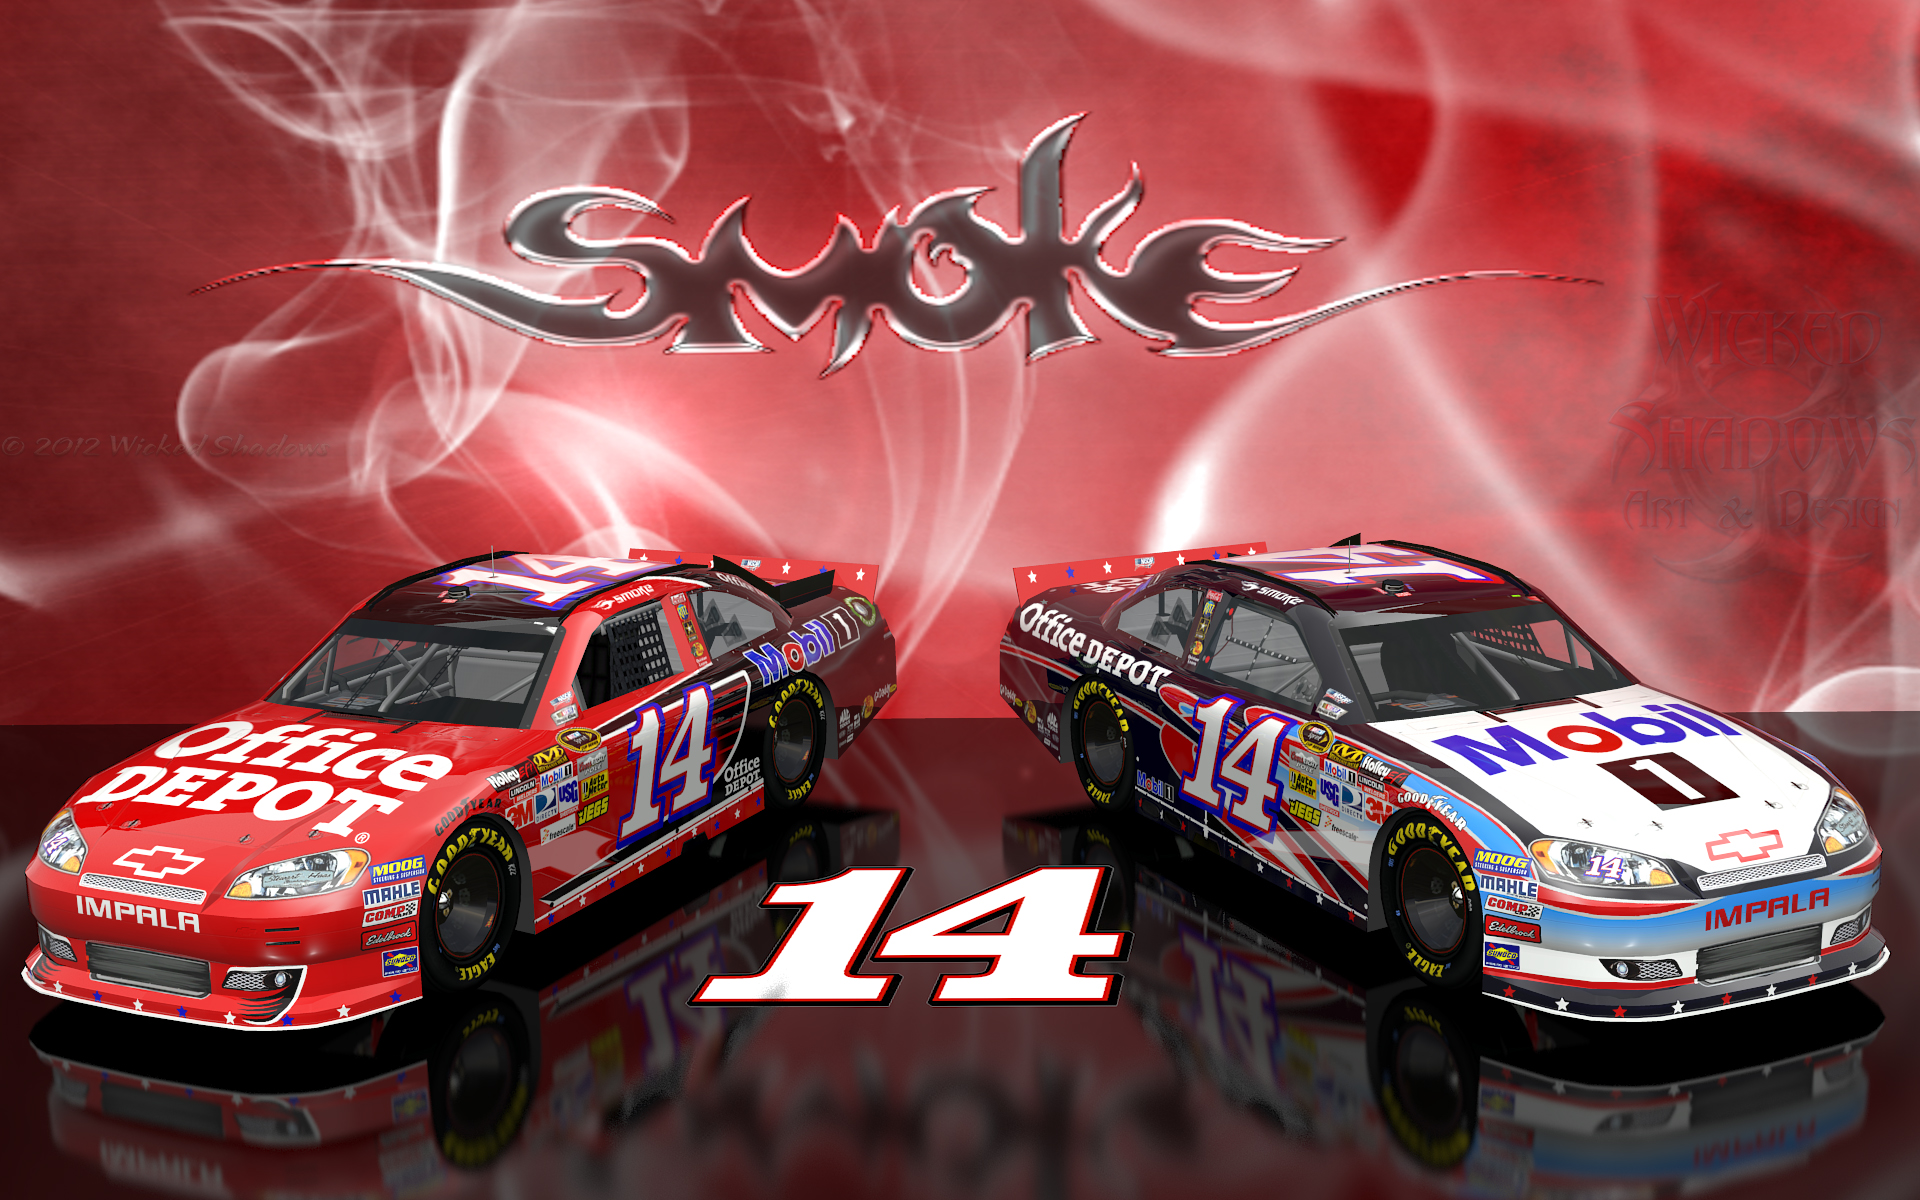 Wallpaper By Wicked Shadows Tony Stewart Office Depot Mobile